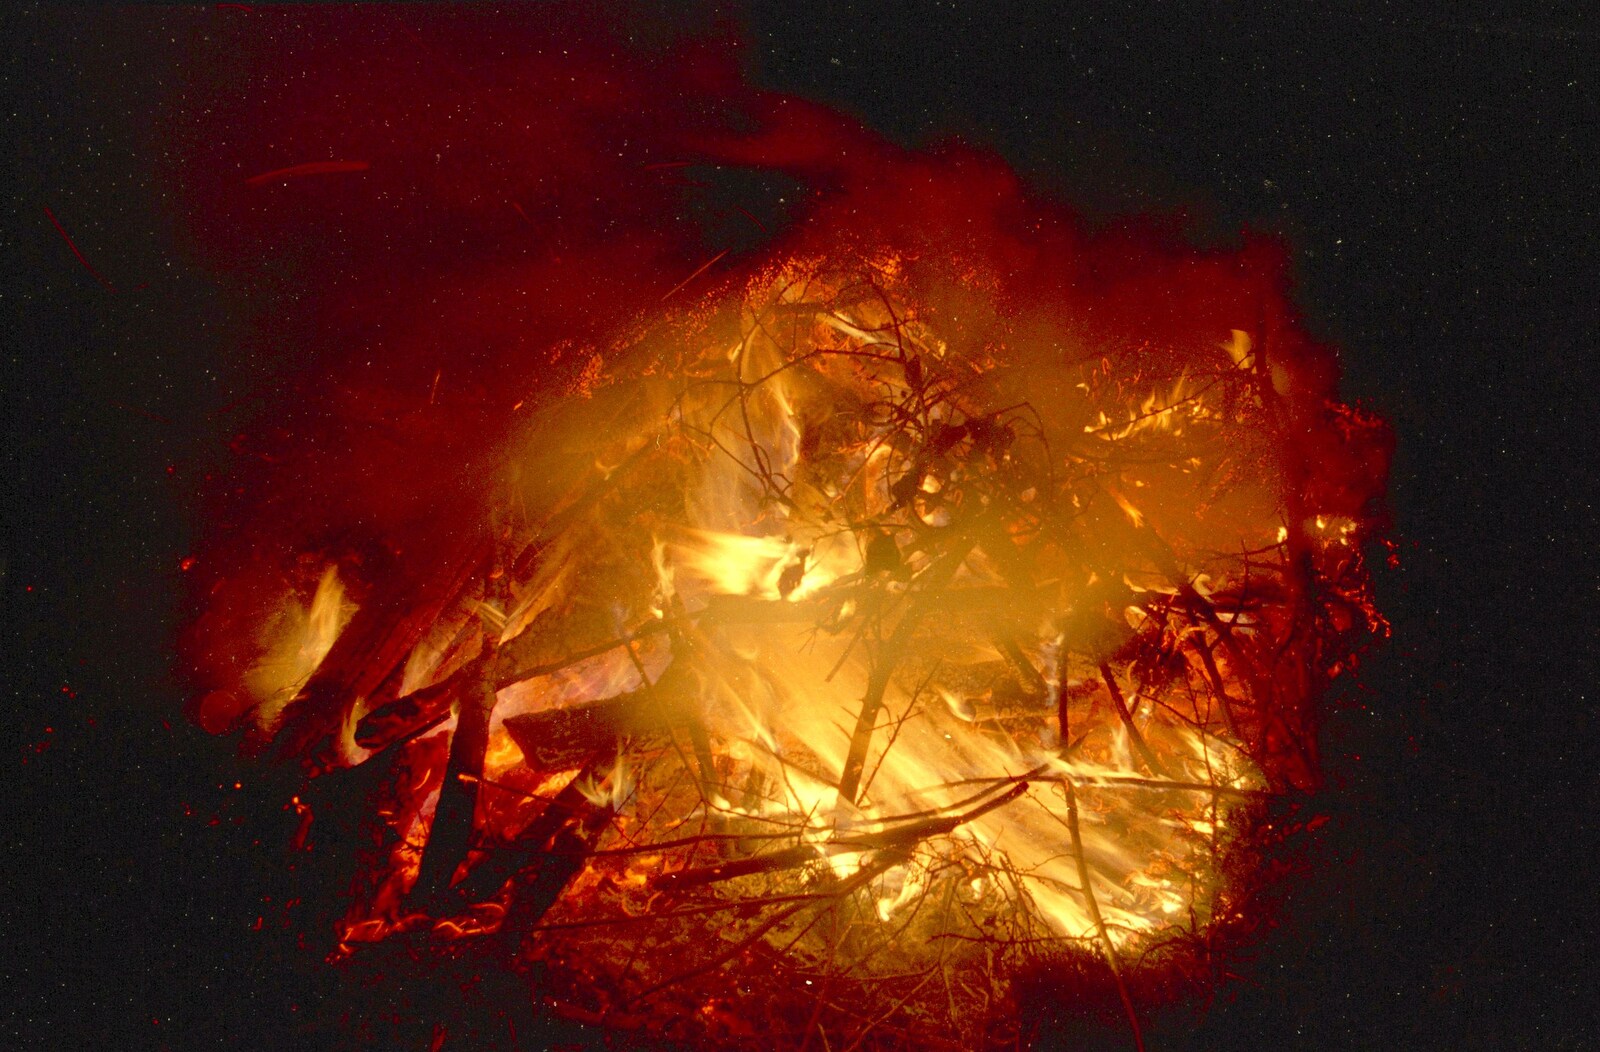 A ball of fire from Bonfire Night and Printec at the Stoke Ash White Horse, Suffolk - 5th November 1991